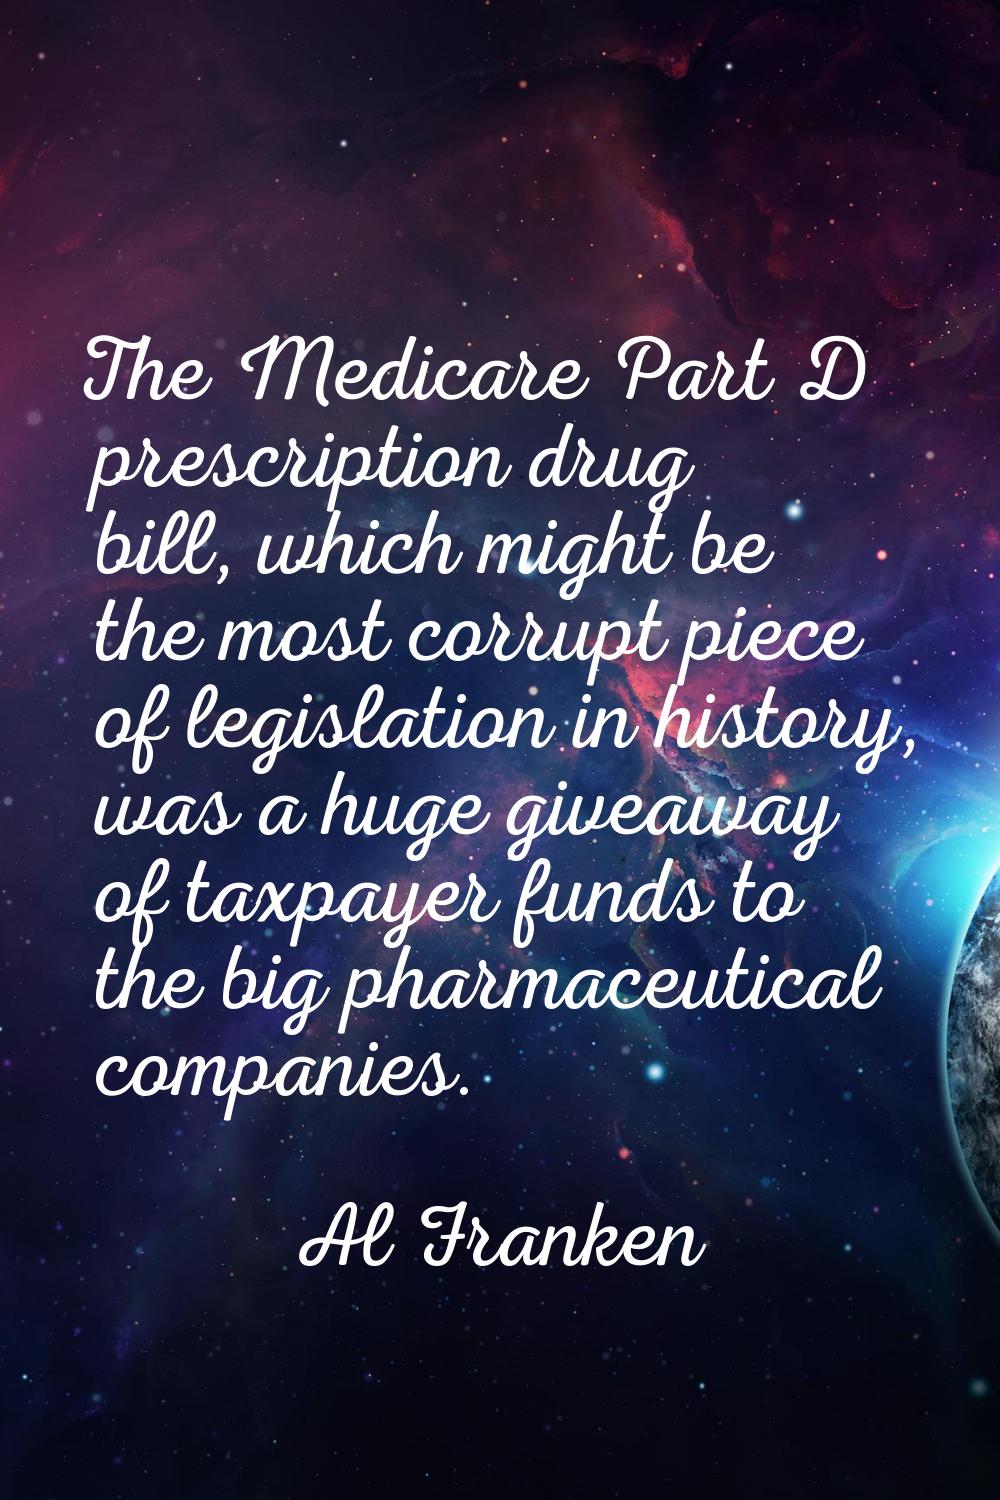 The Medicare Part D prescription drug bill, which might be the most corrupt piece of legislation in